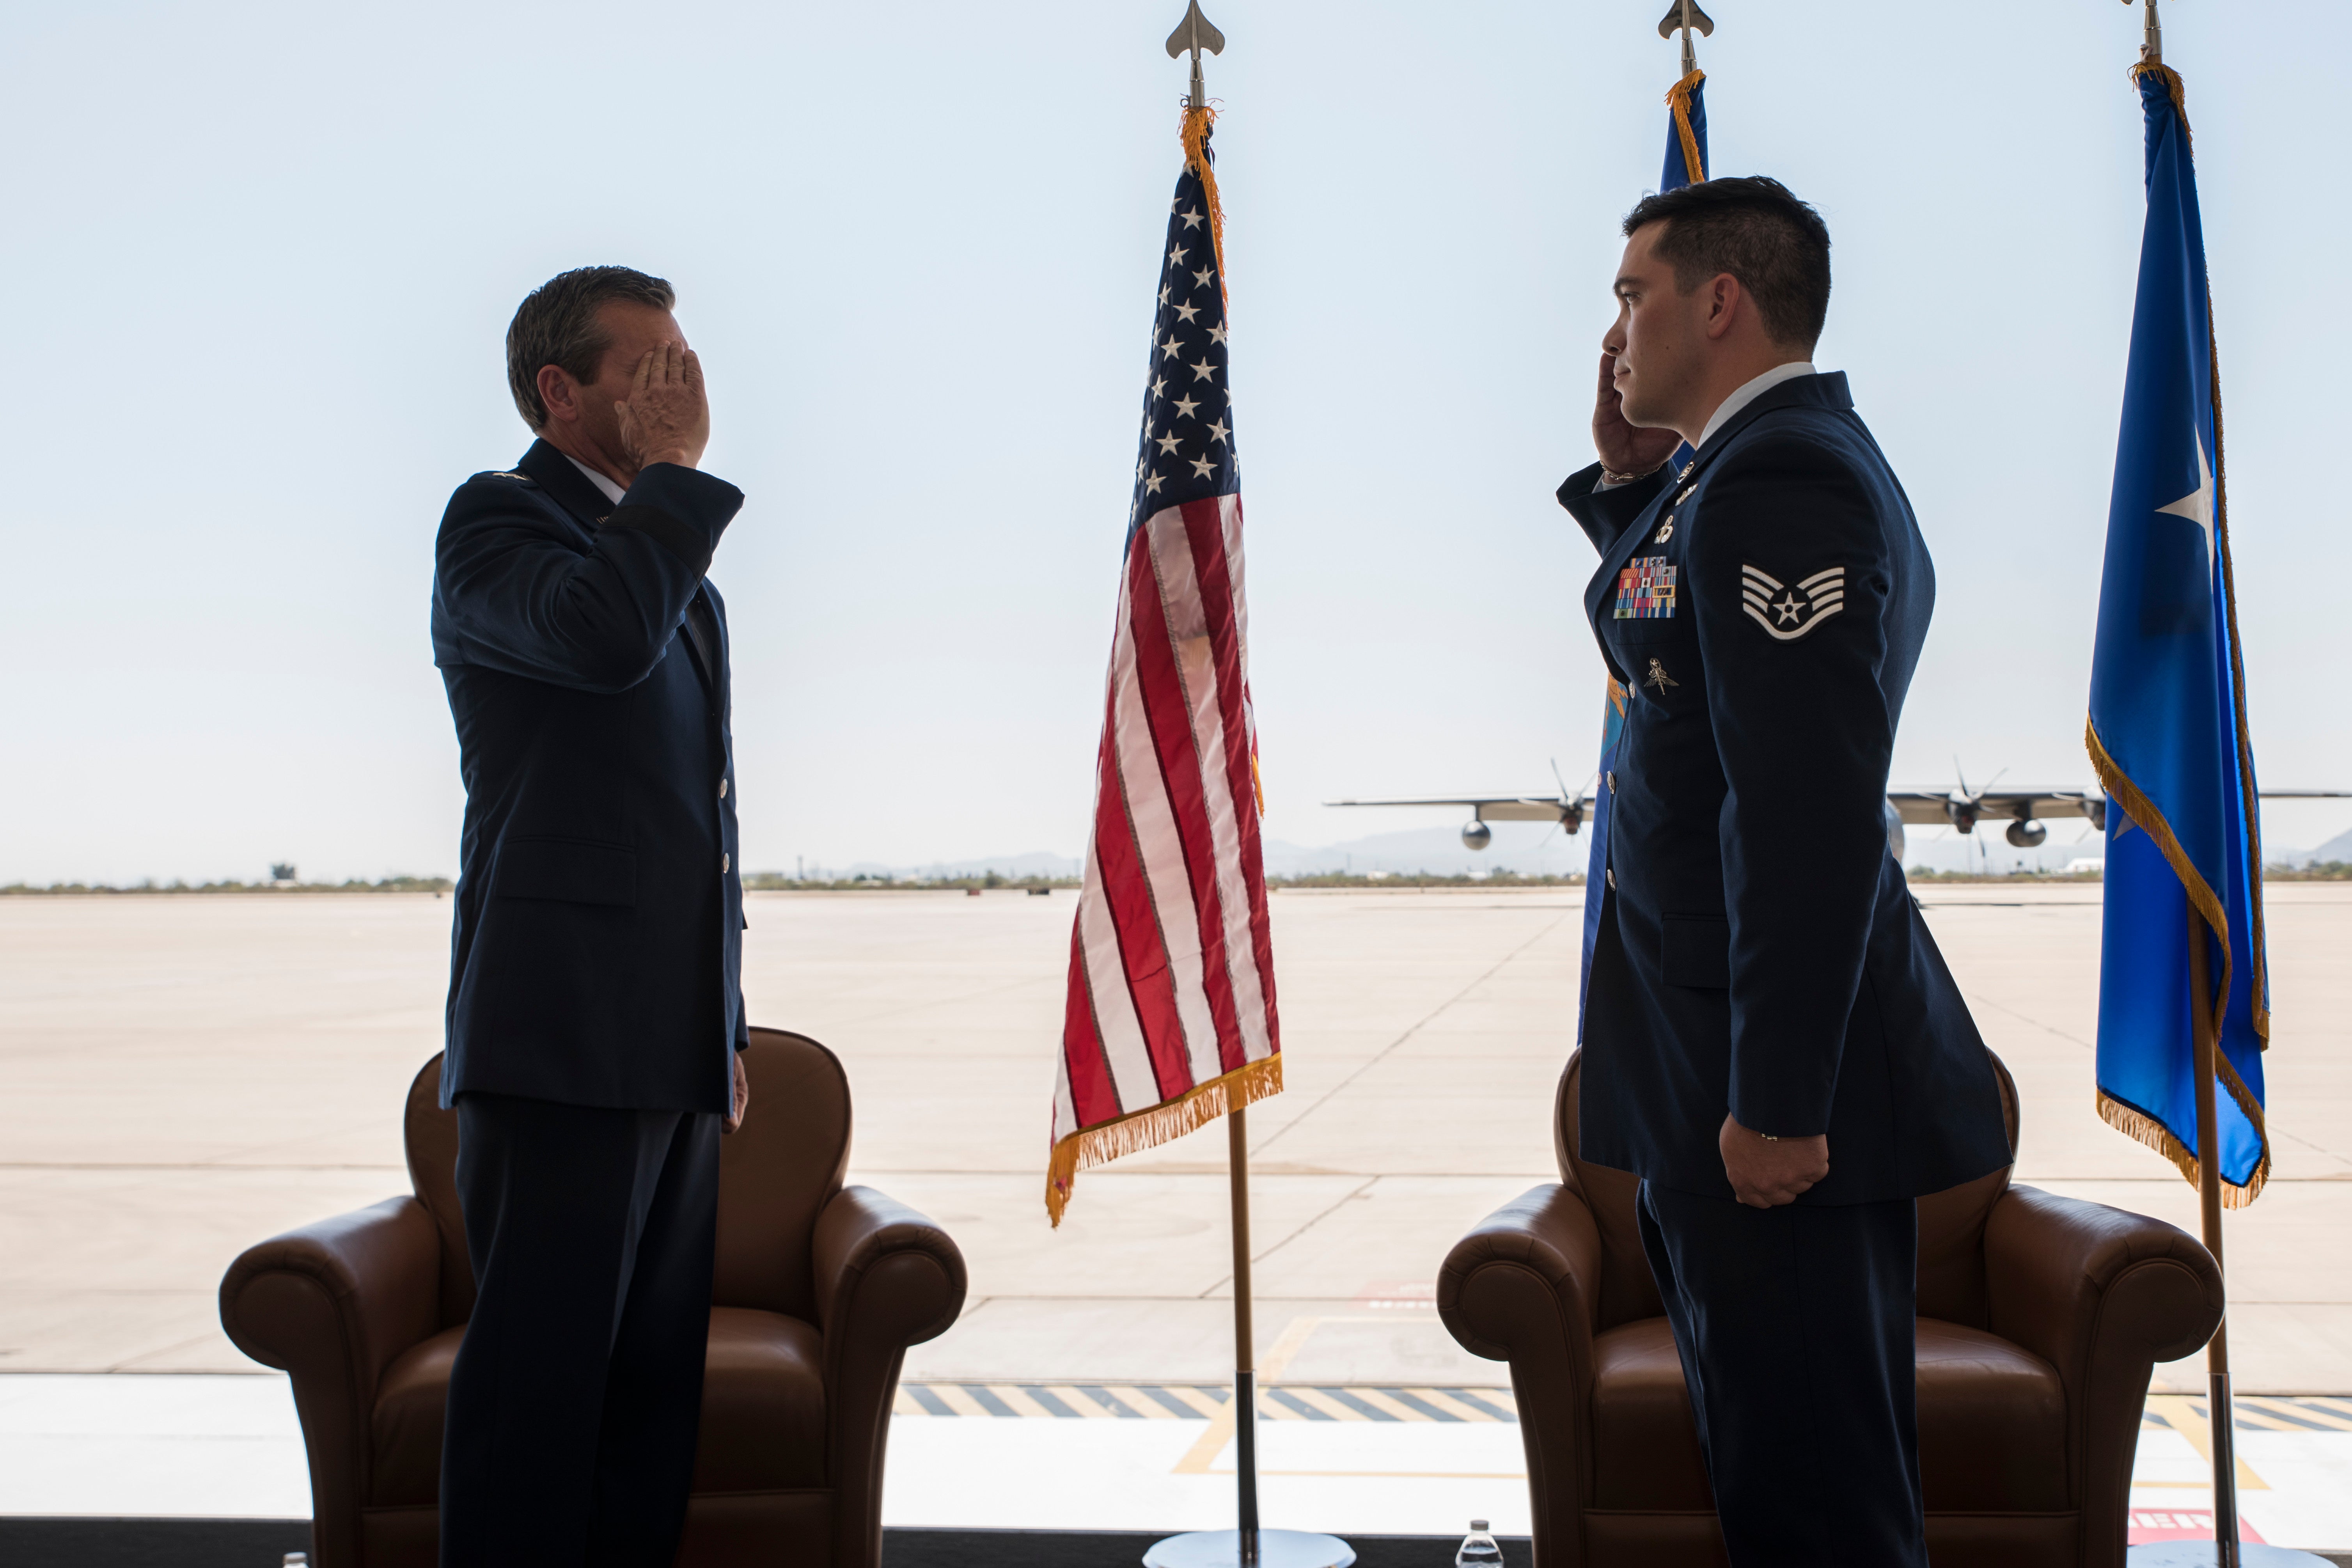 Air Force medics awarded Bronze Star for heroism during special ops raids in Afghanistan